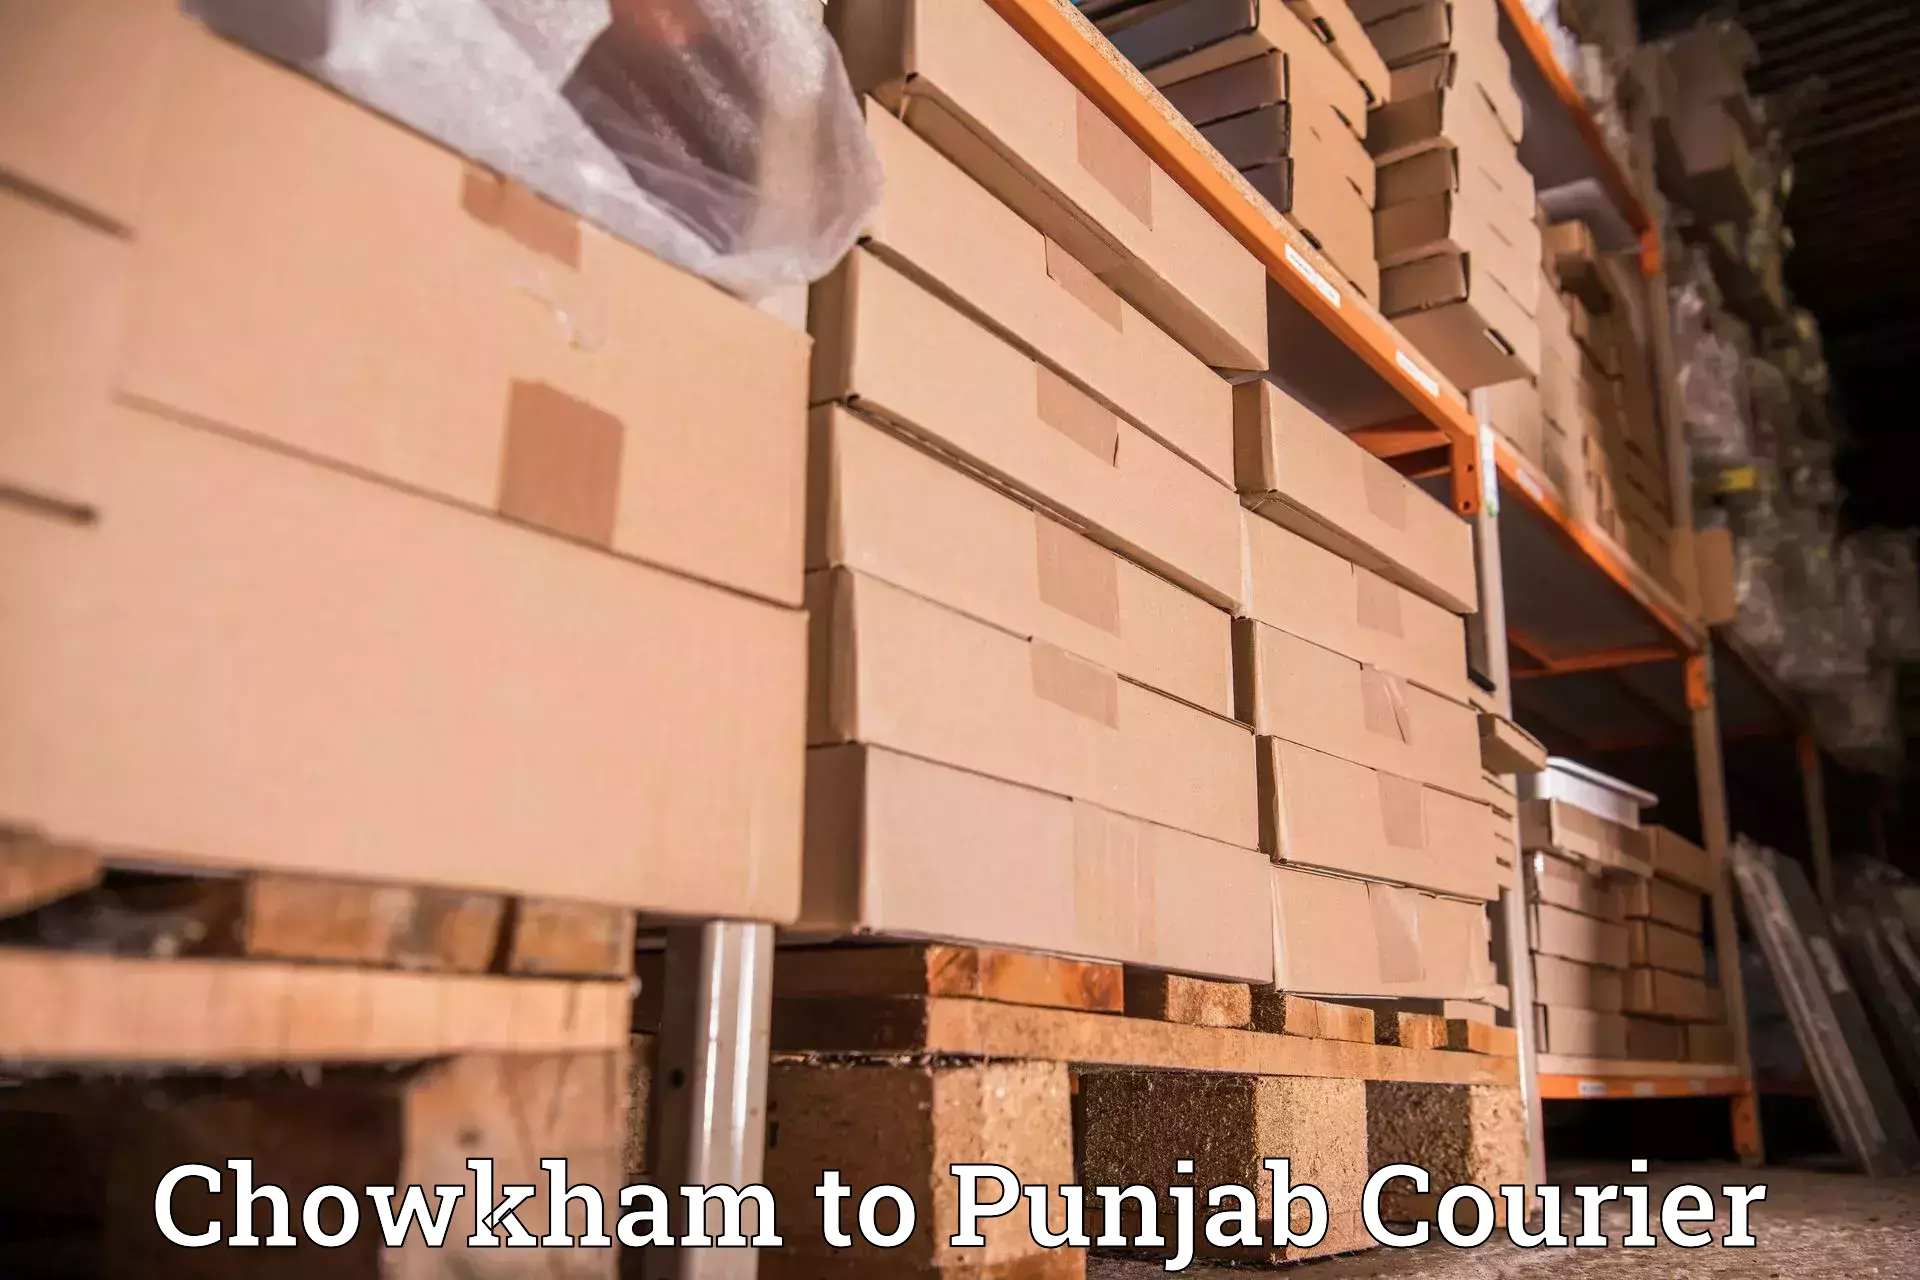 Personal courier services Chowkham to Mandi Gobindgarh